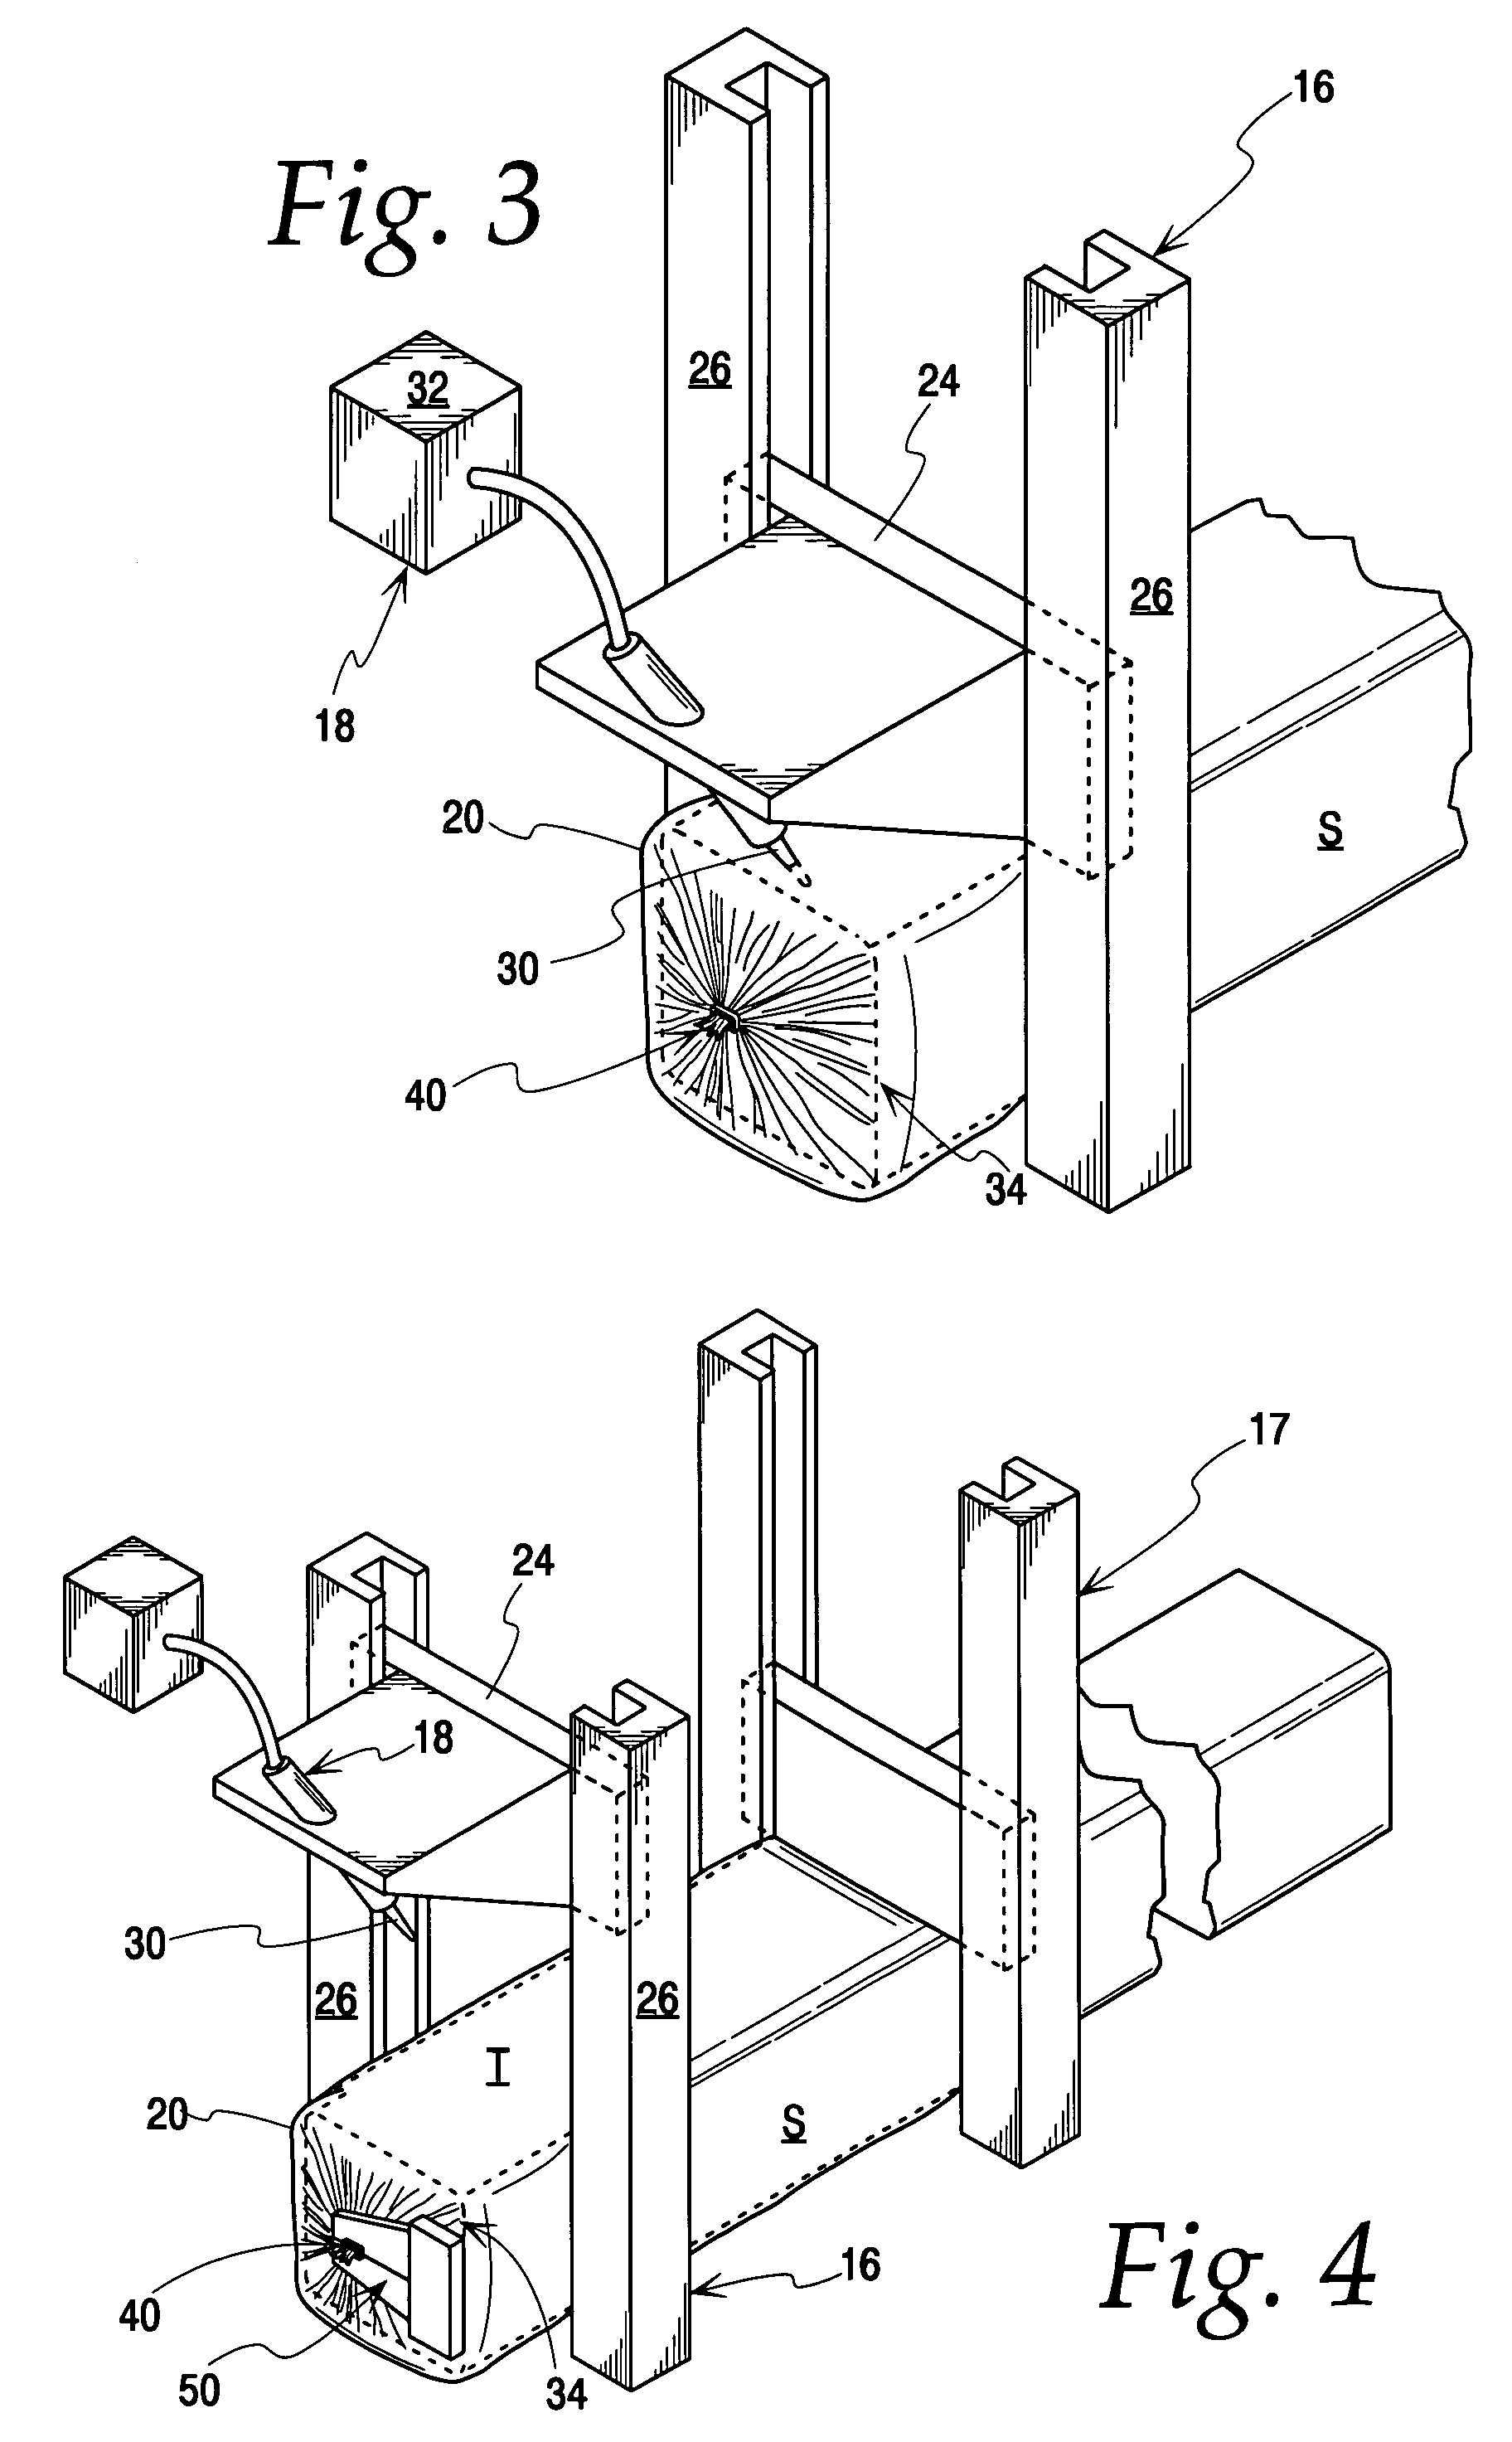 Automated extraction of casing clips from cooked meat products